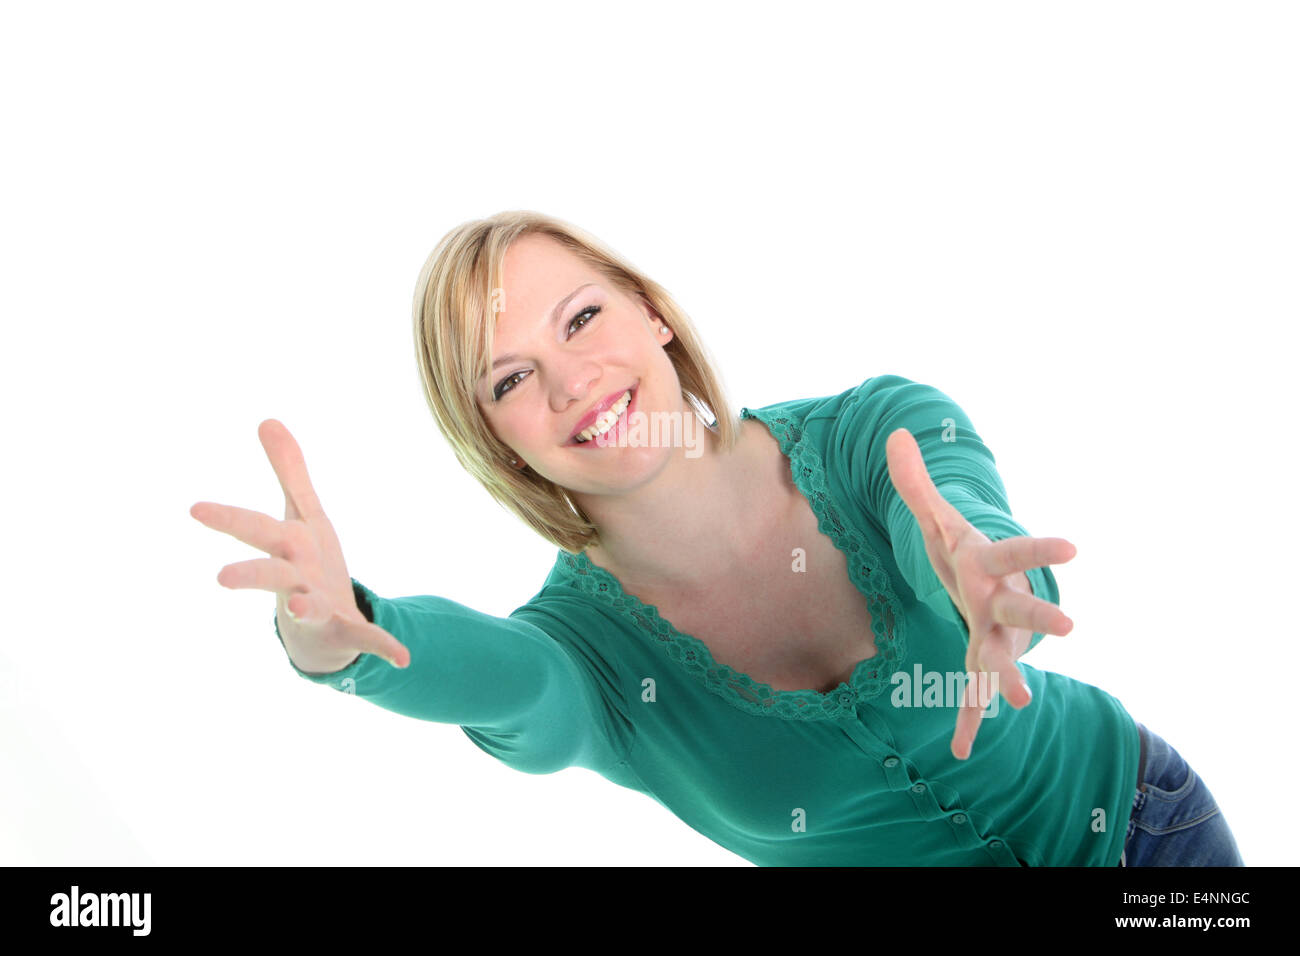 Smiling woman with outstretched arms Stock Photo